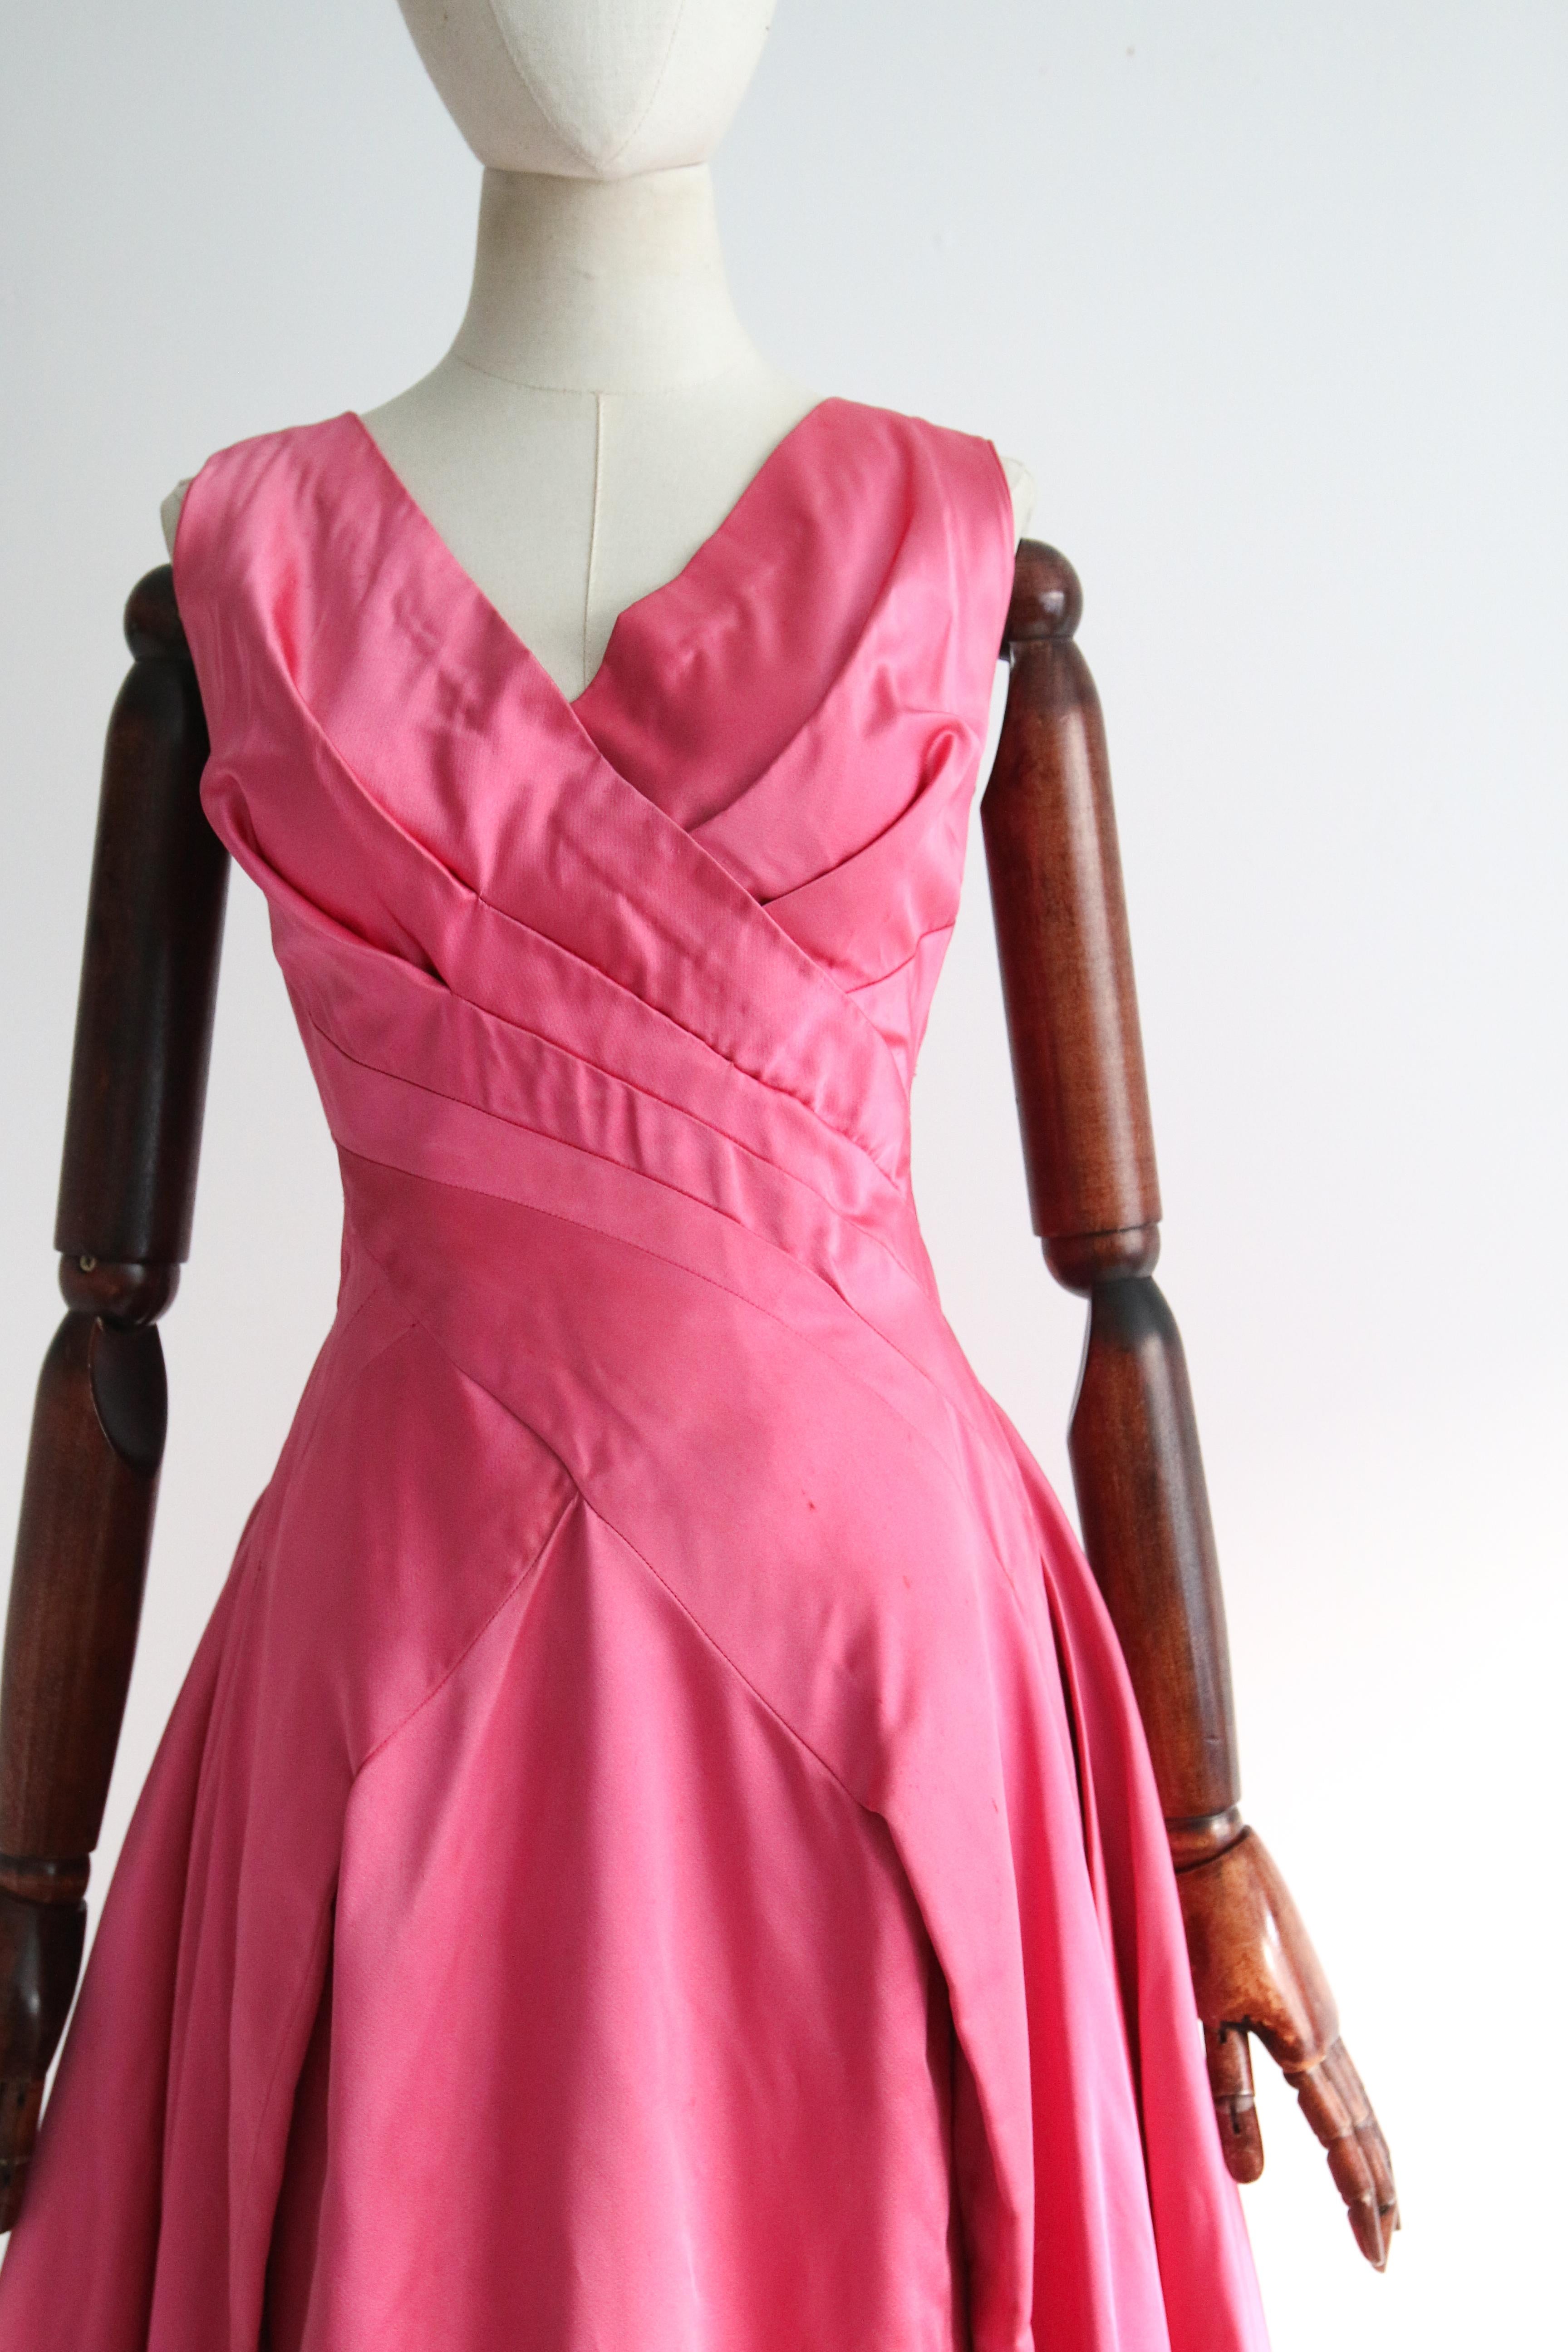 Vintage 1950's Duchess Satin Sweet Pink Pleated Dress UK 8-10 US 4-6 In Good Condition For Sale In Cheltenham, GB